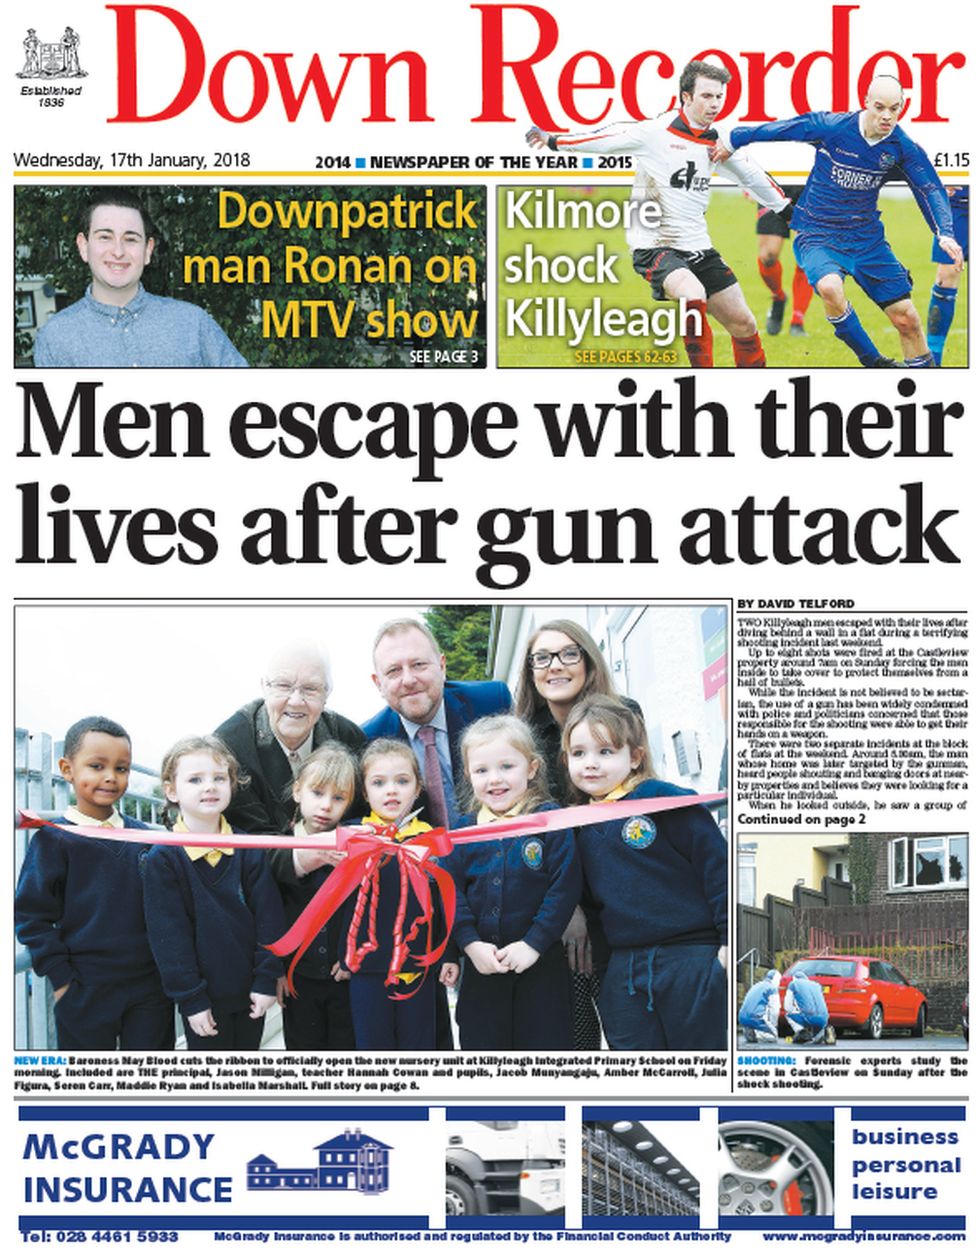 Down Recorder front page